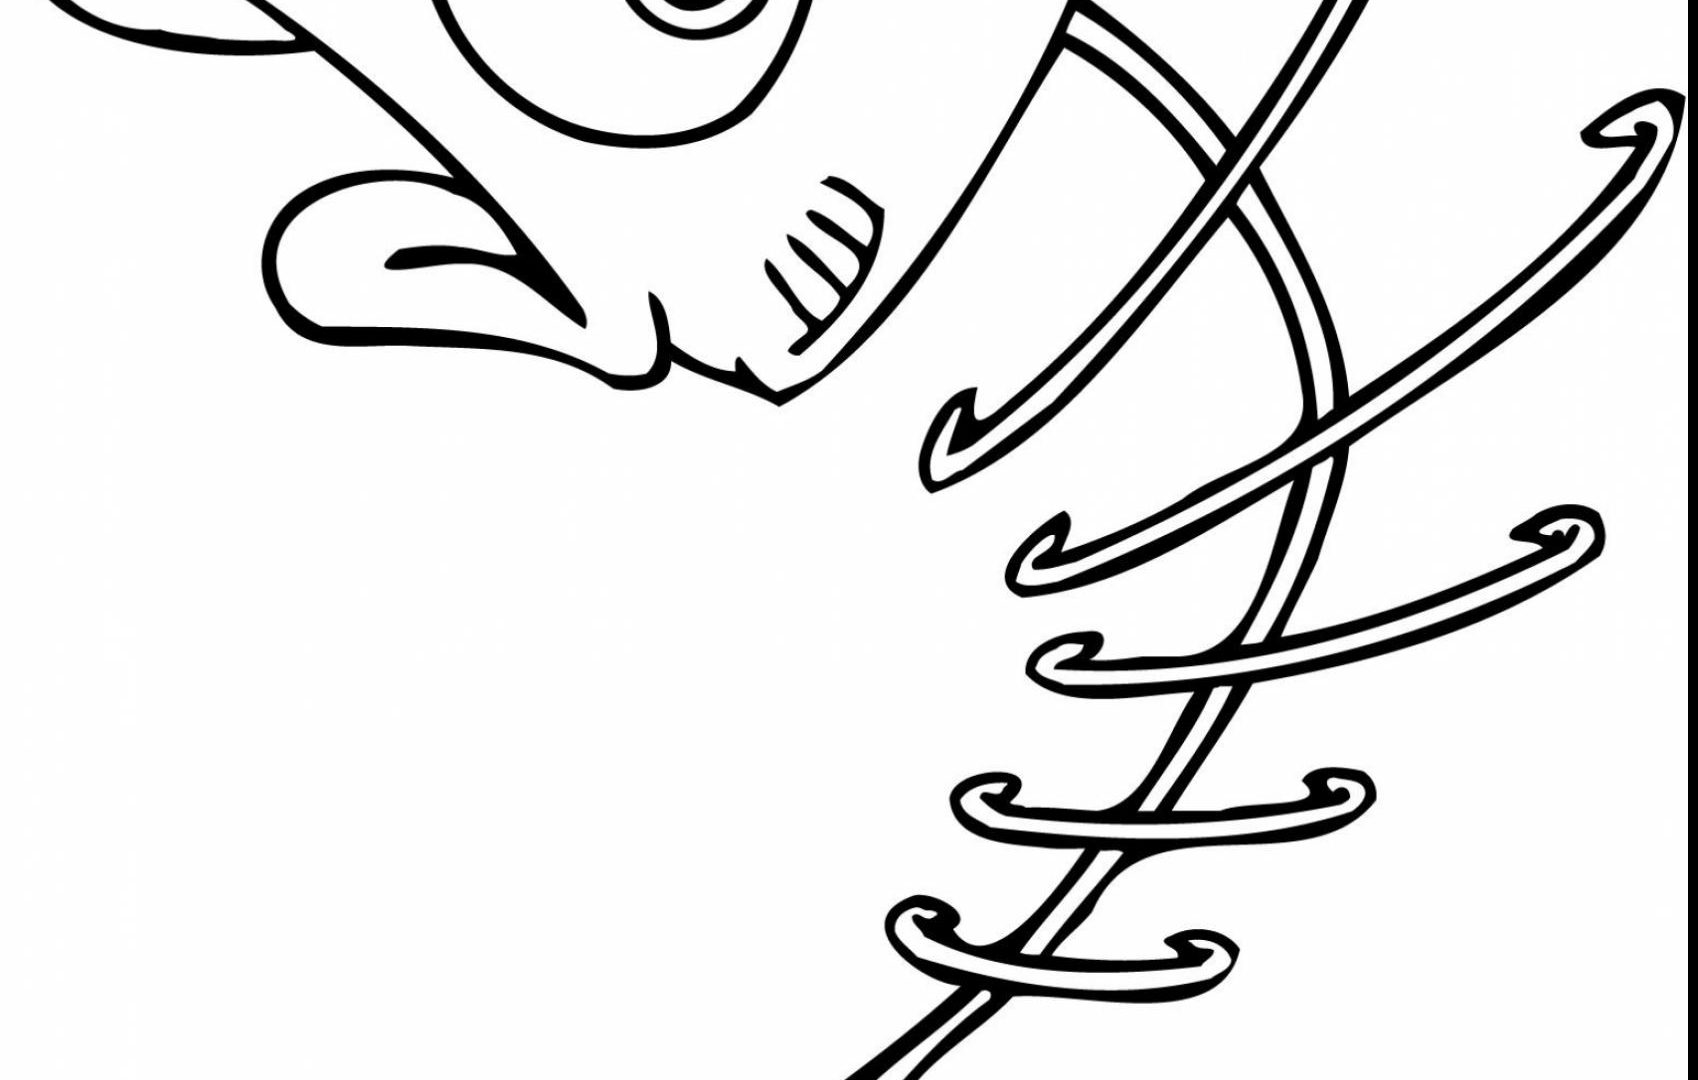 The best free Skellington coloring page images. Download from 129 free